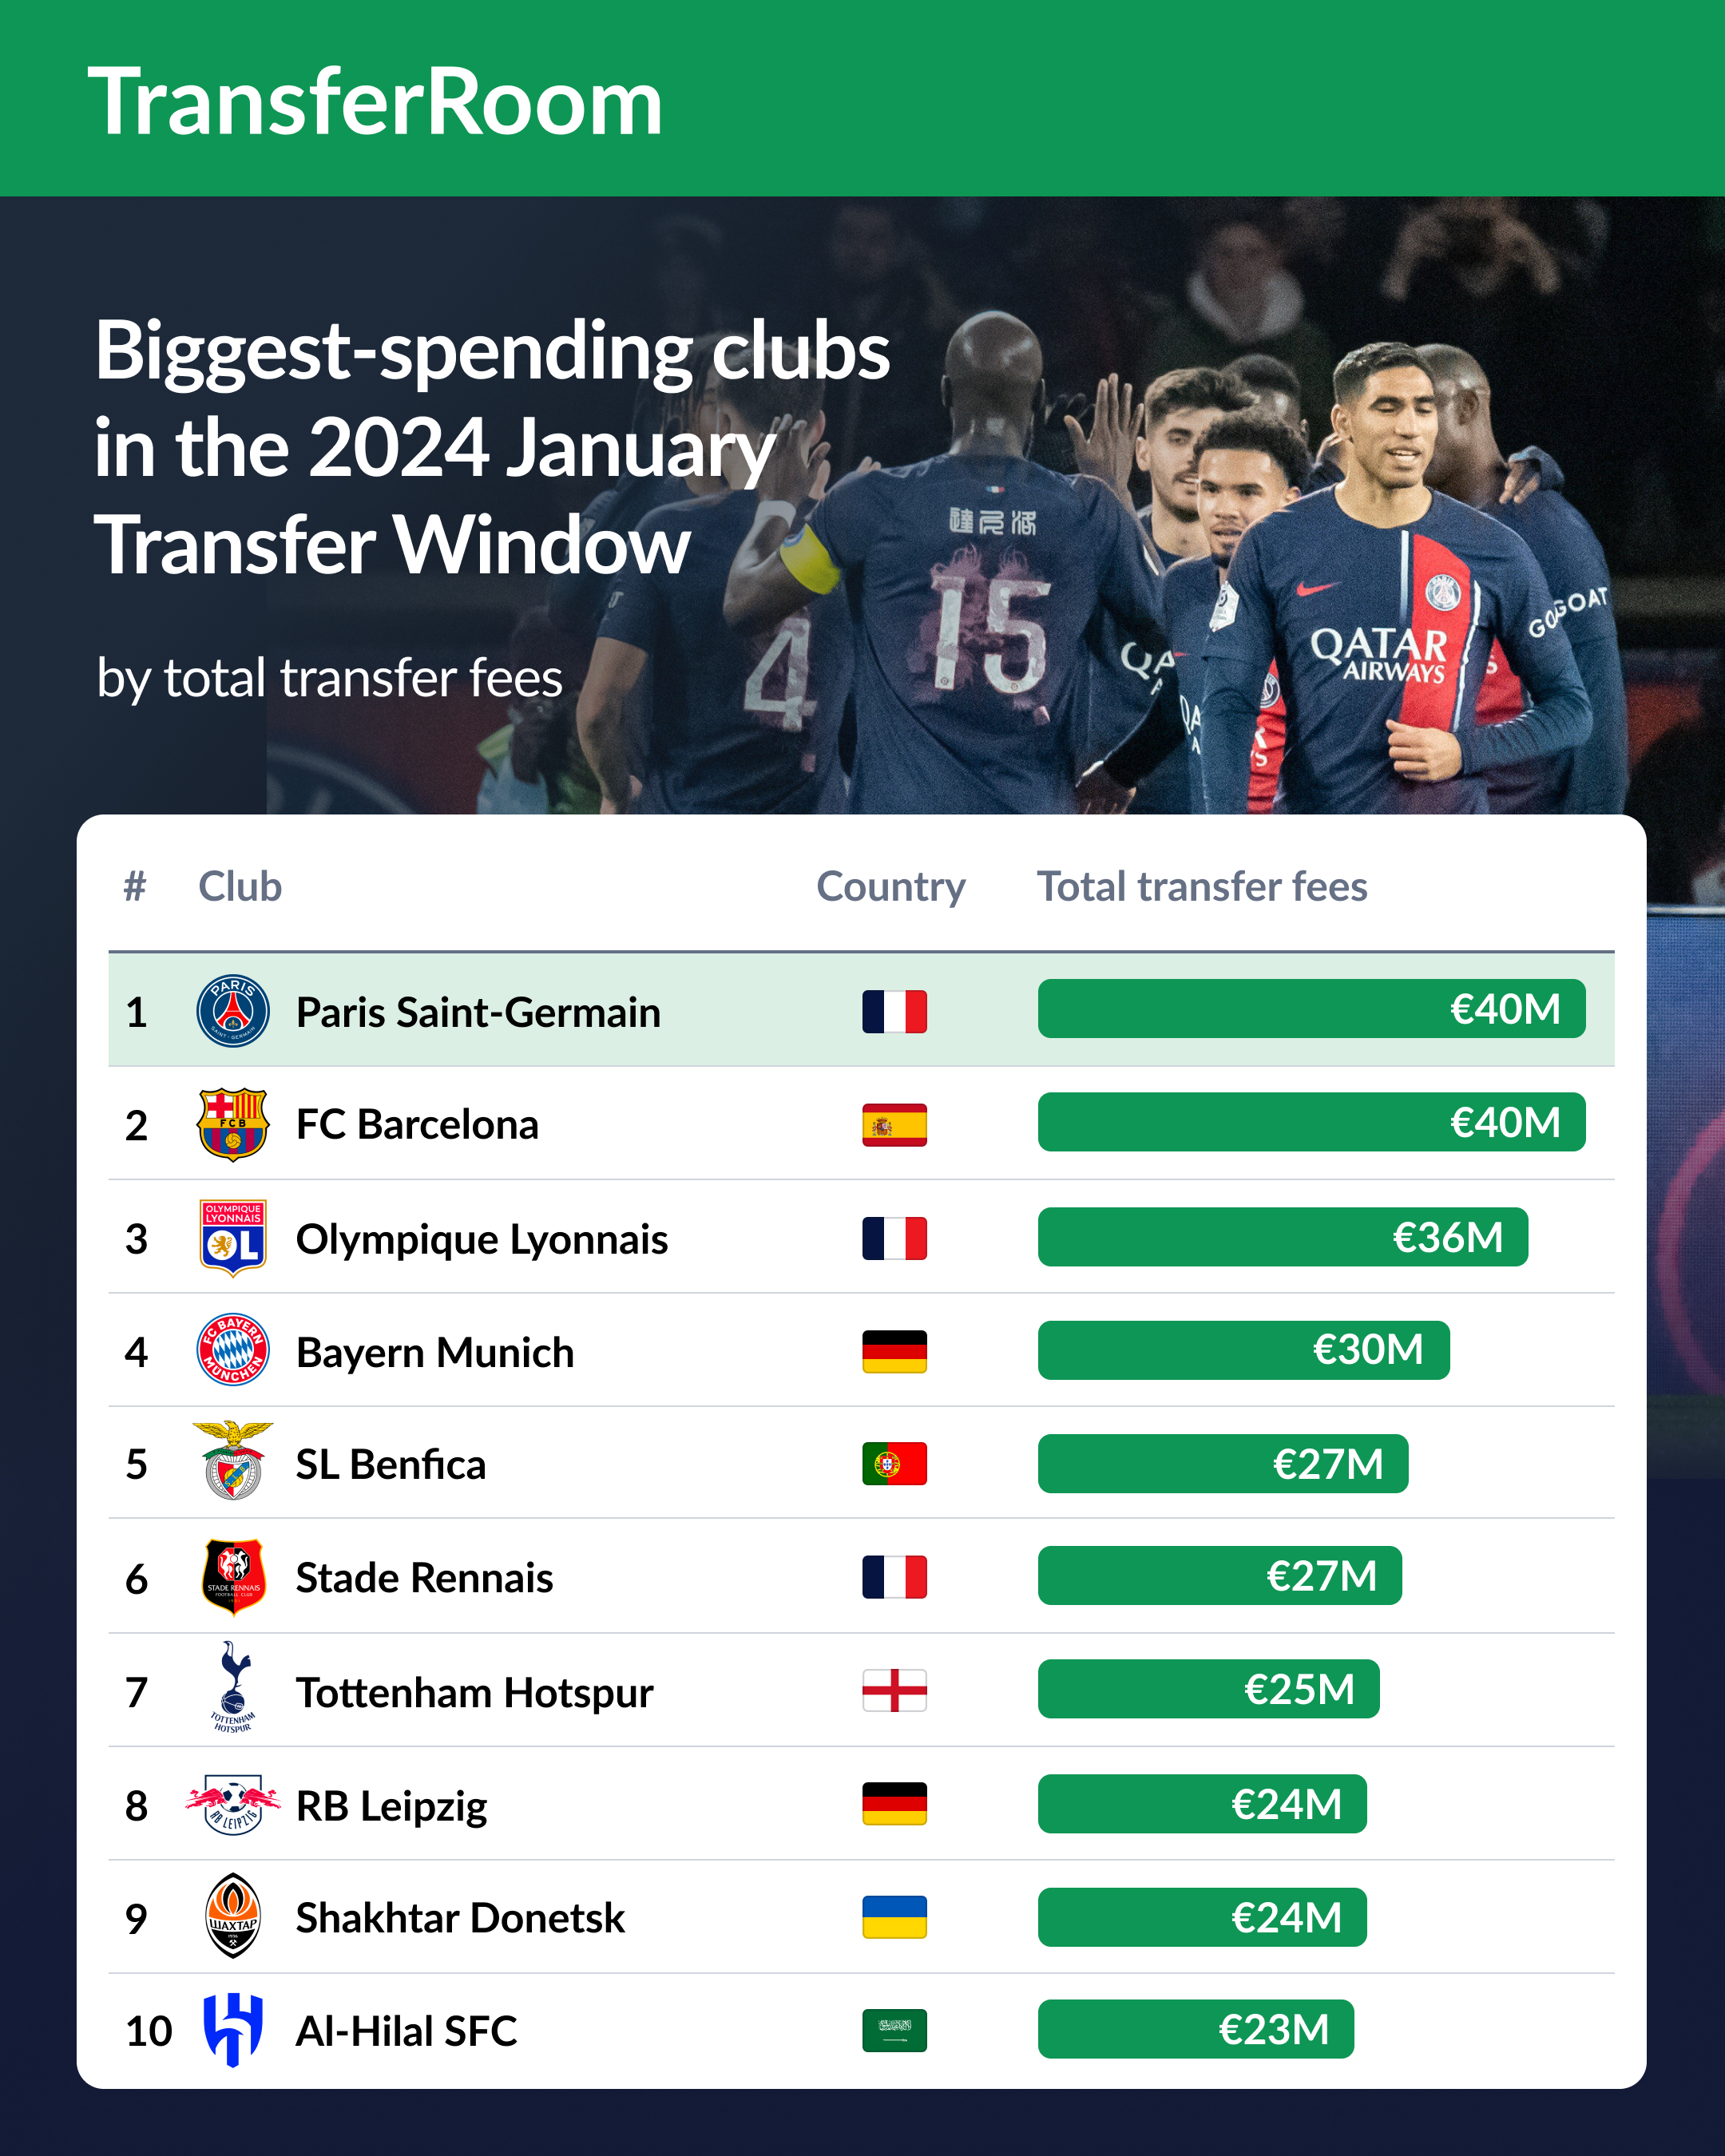 Biggest-spending Clubs in 2024 January Transfer Window